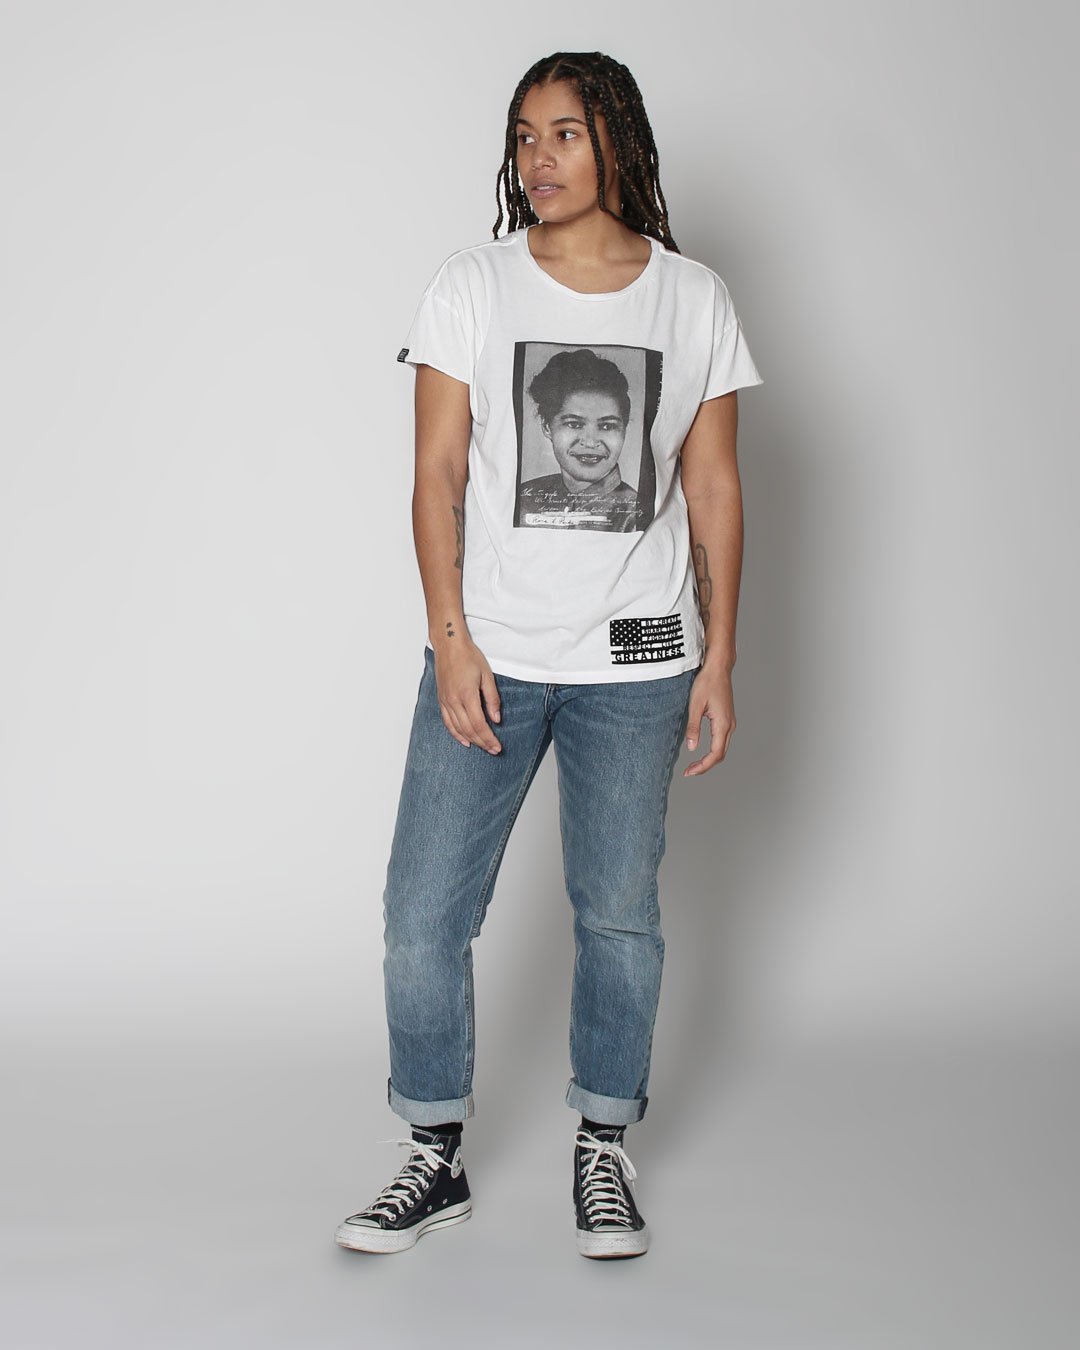 BHT - Rosa Parks Photo Women&#39;s Tee - Roots of Inc dba Roots of Fight